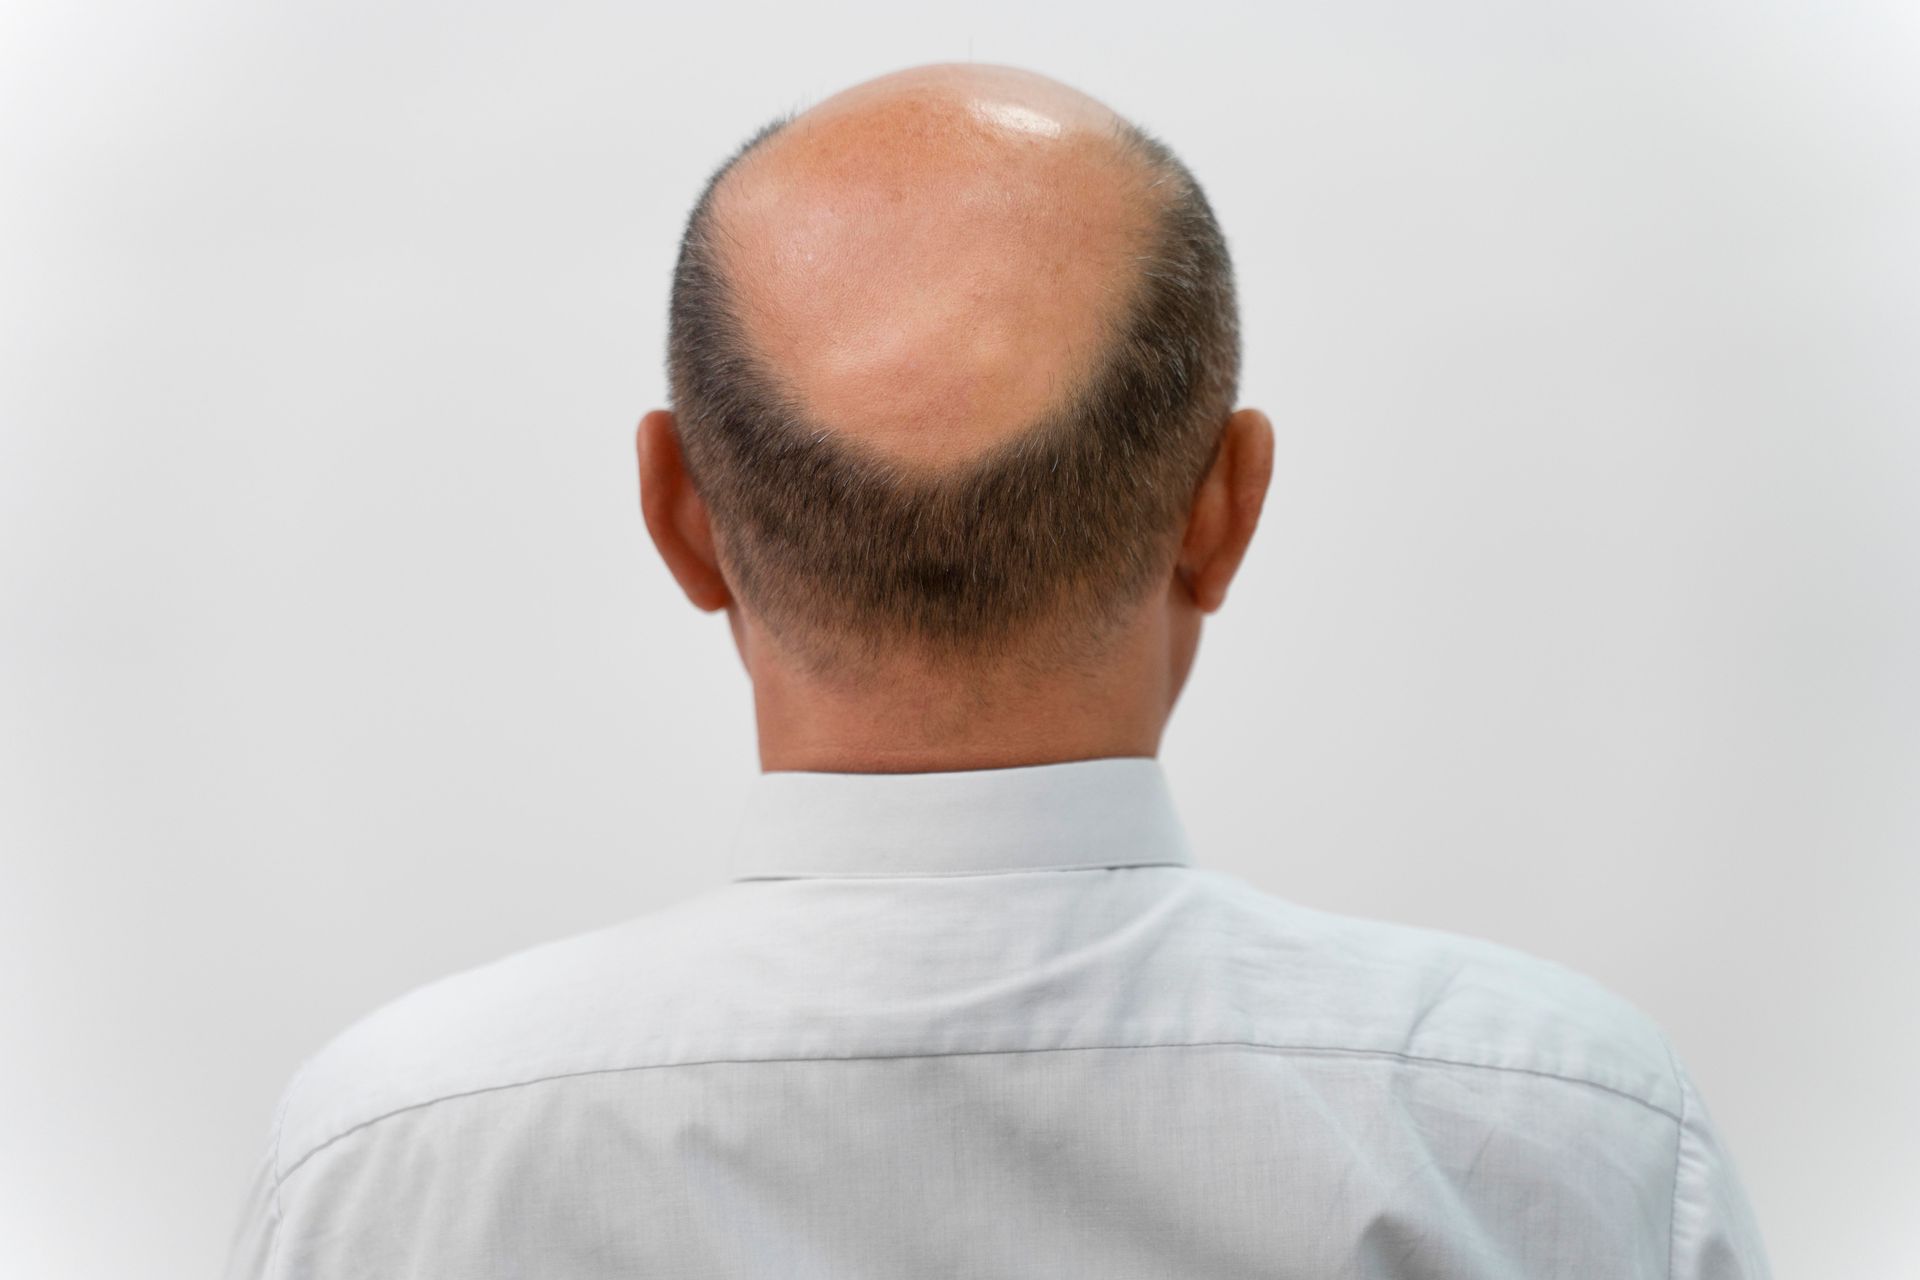 the back of a bald man 's head is shown .